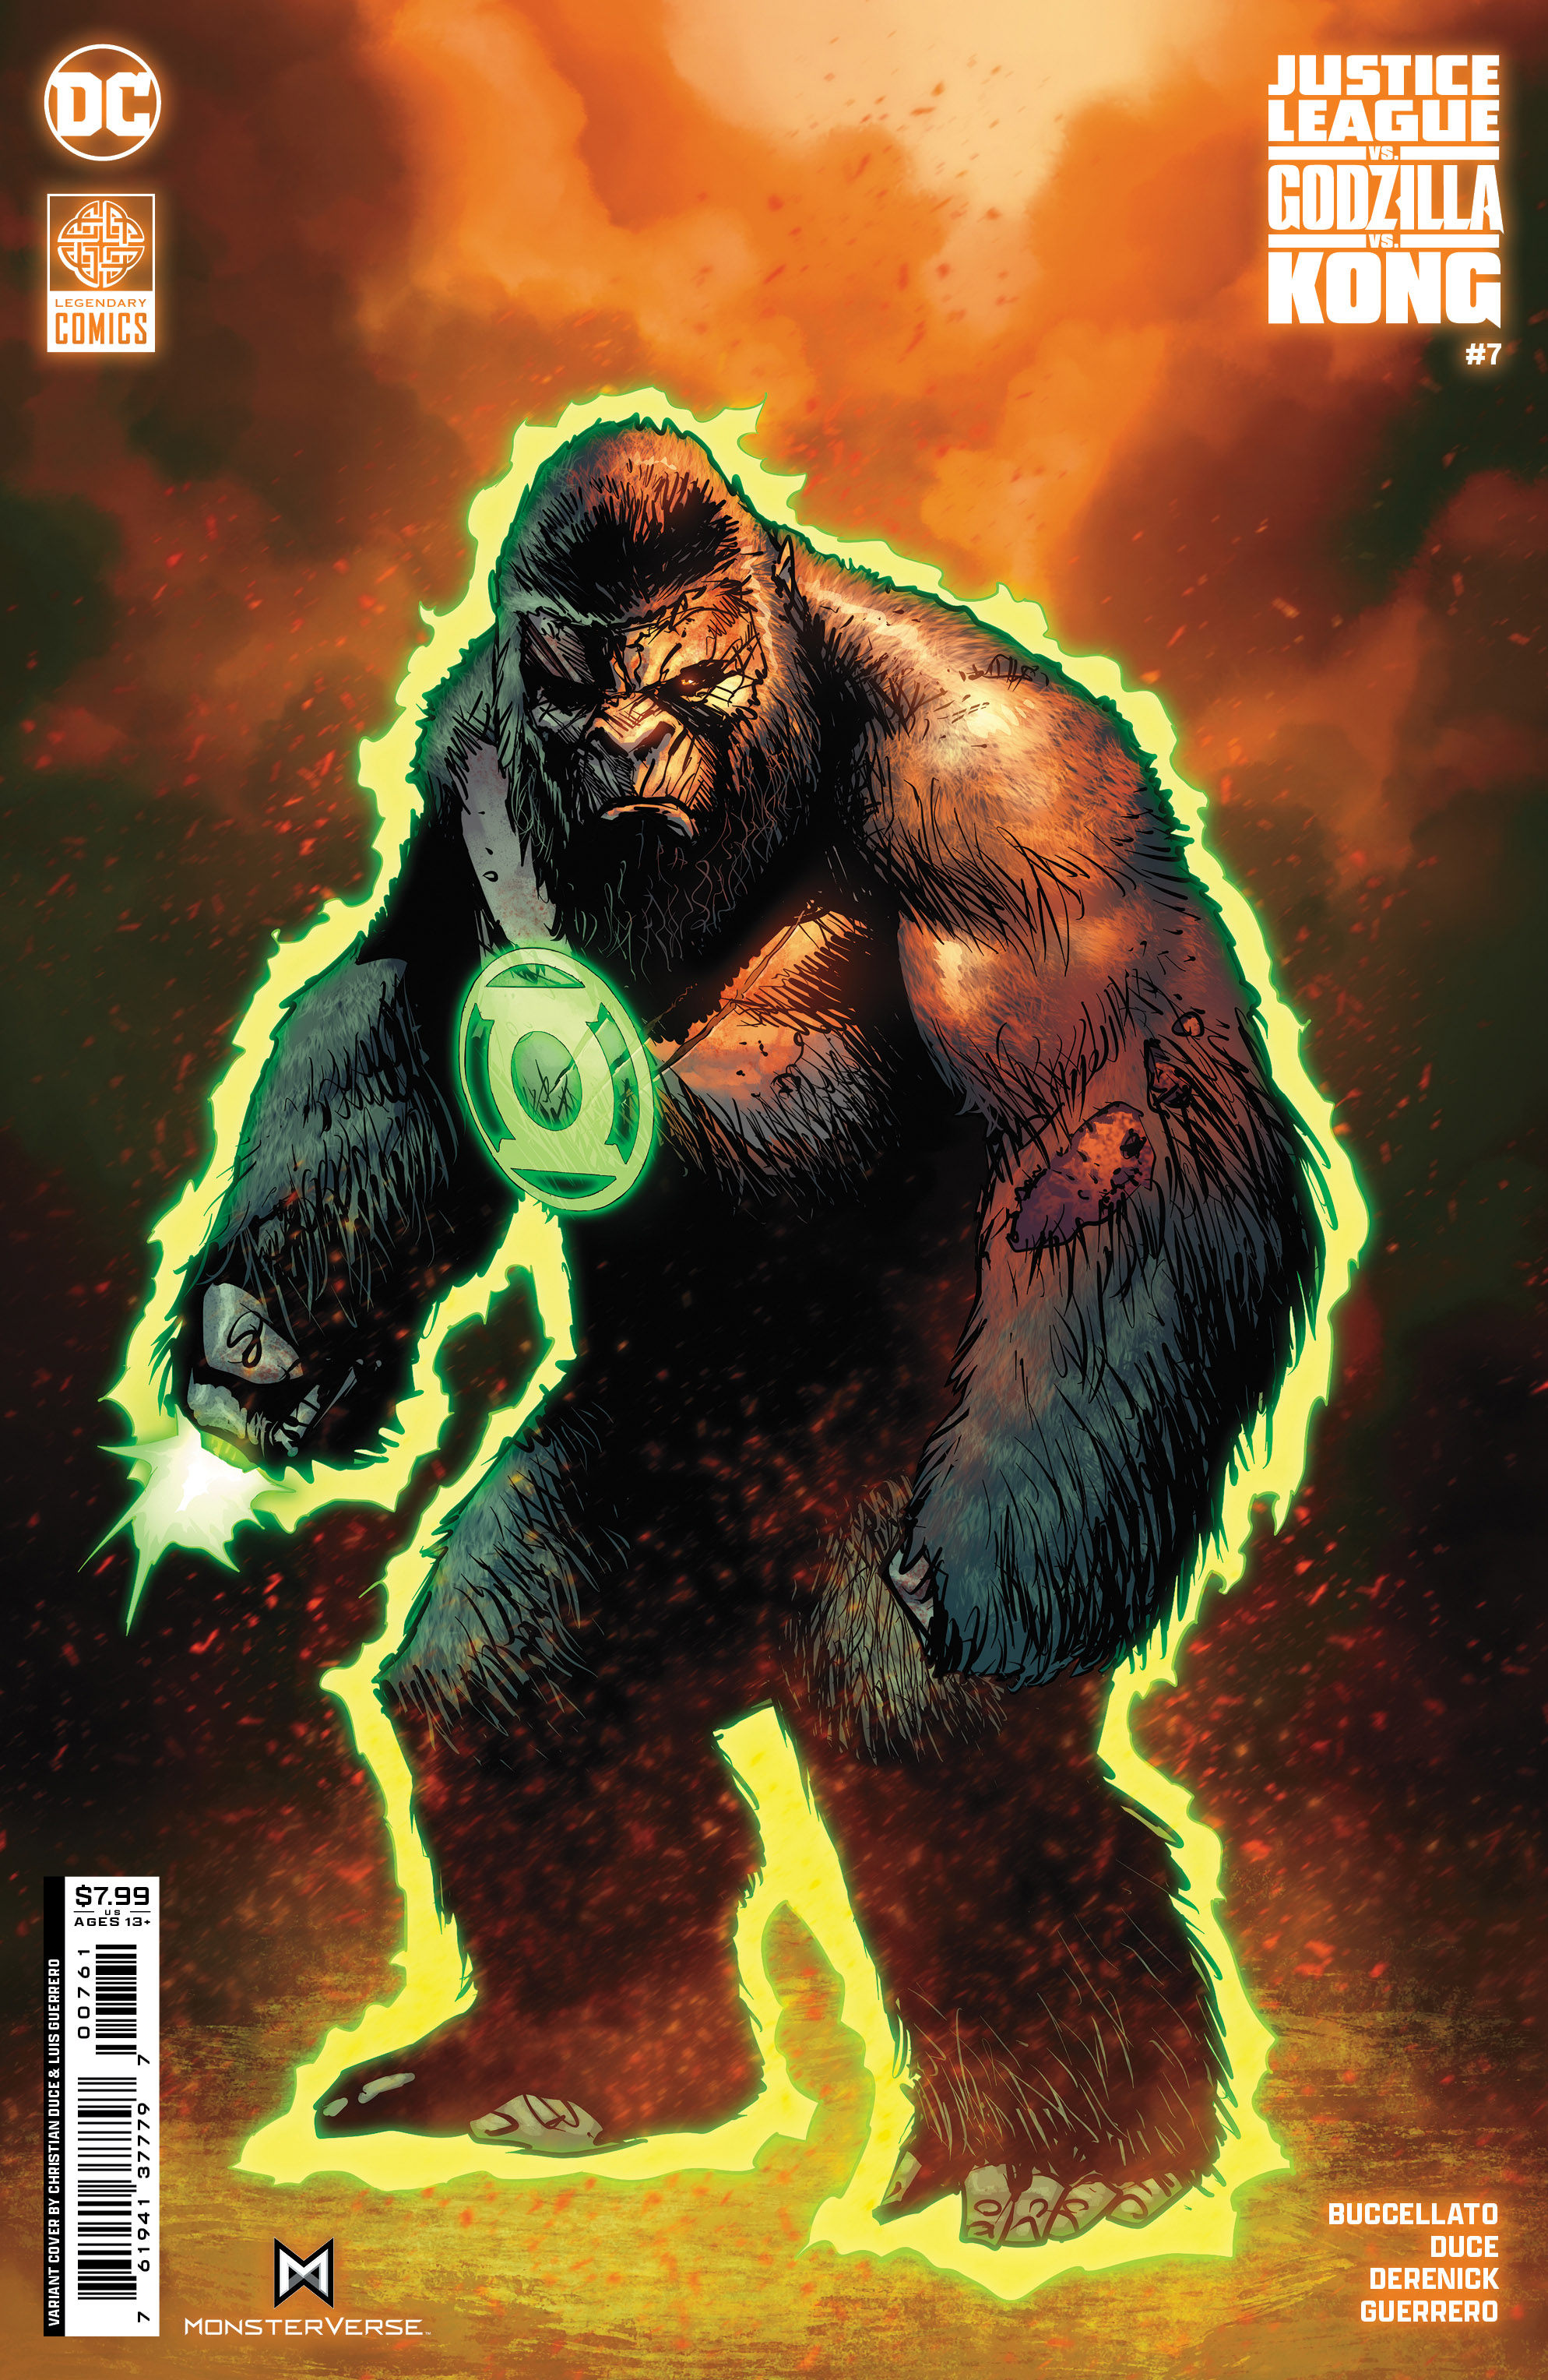 Justice League Vs Godzilla Vs Kong #7 Cover F Christian Duce Kong As GL Foil Variant (Of 7)